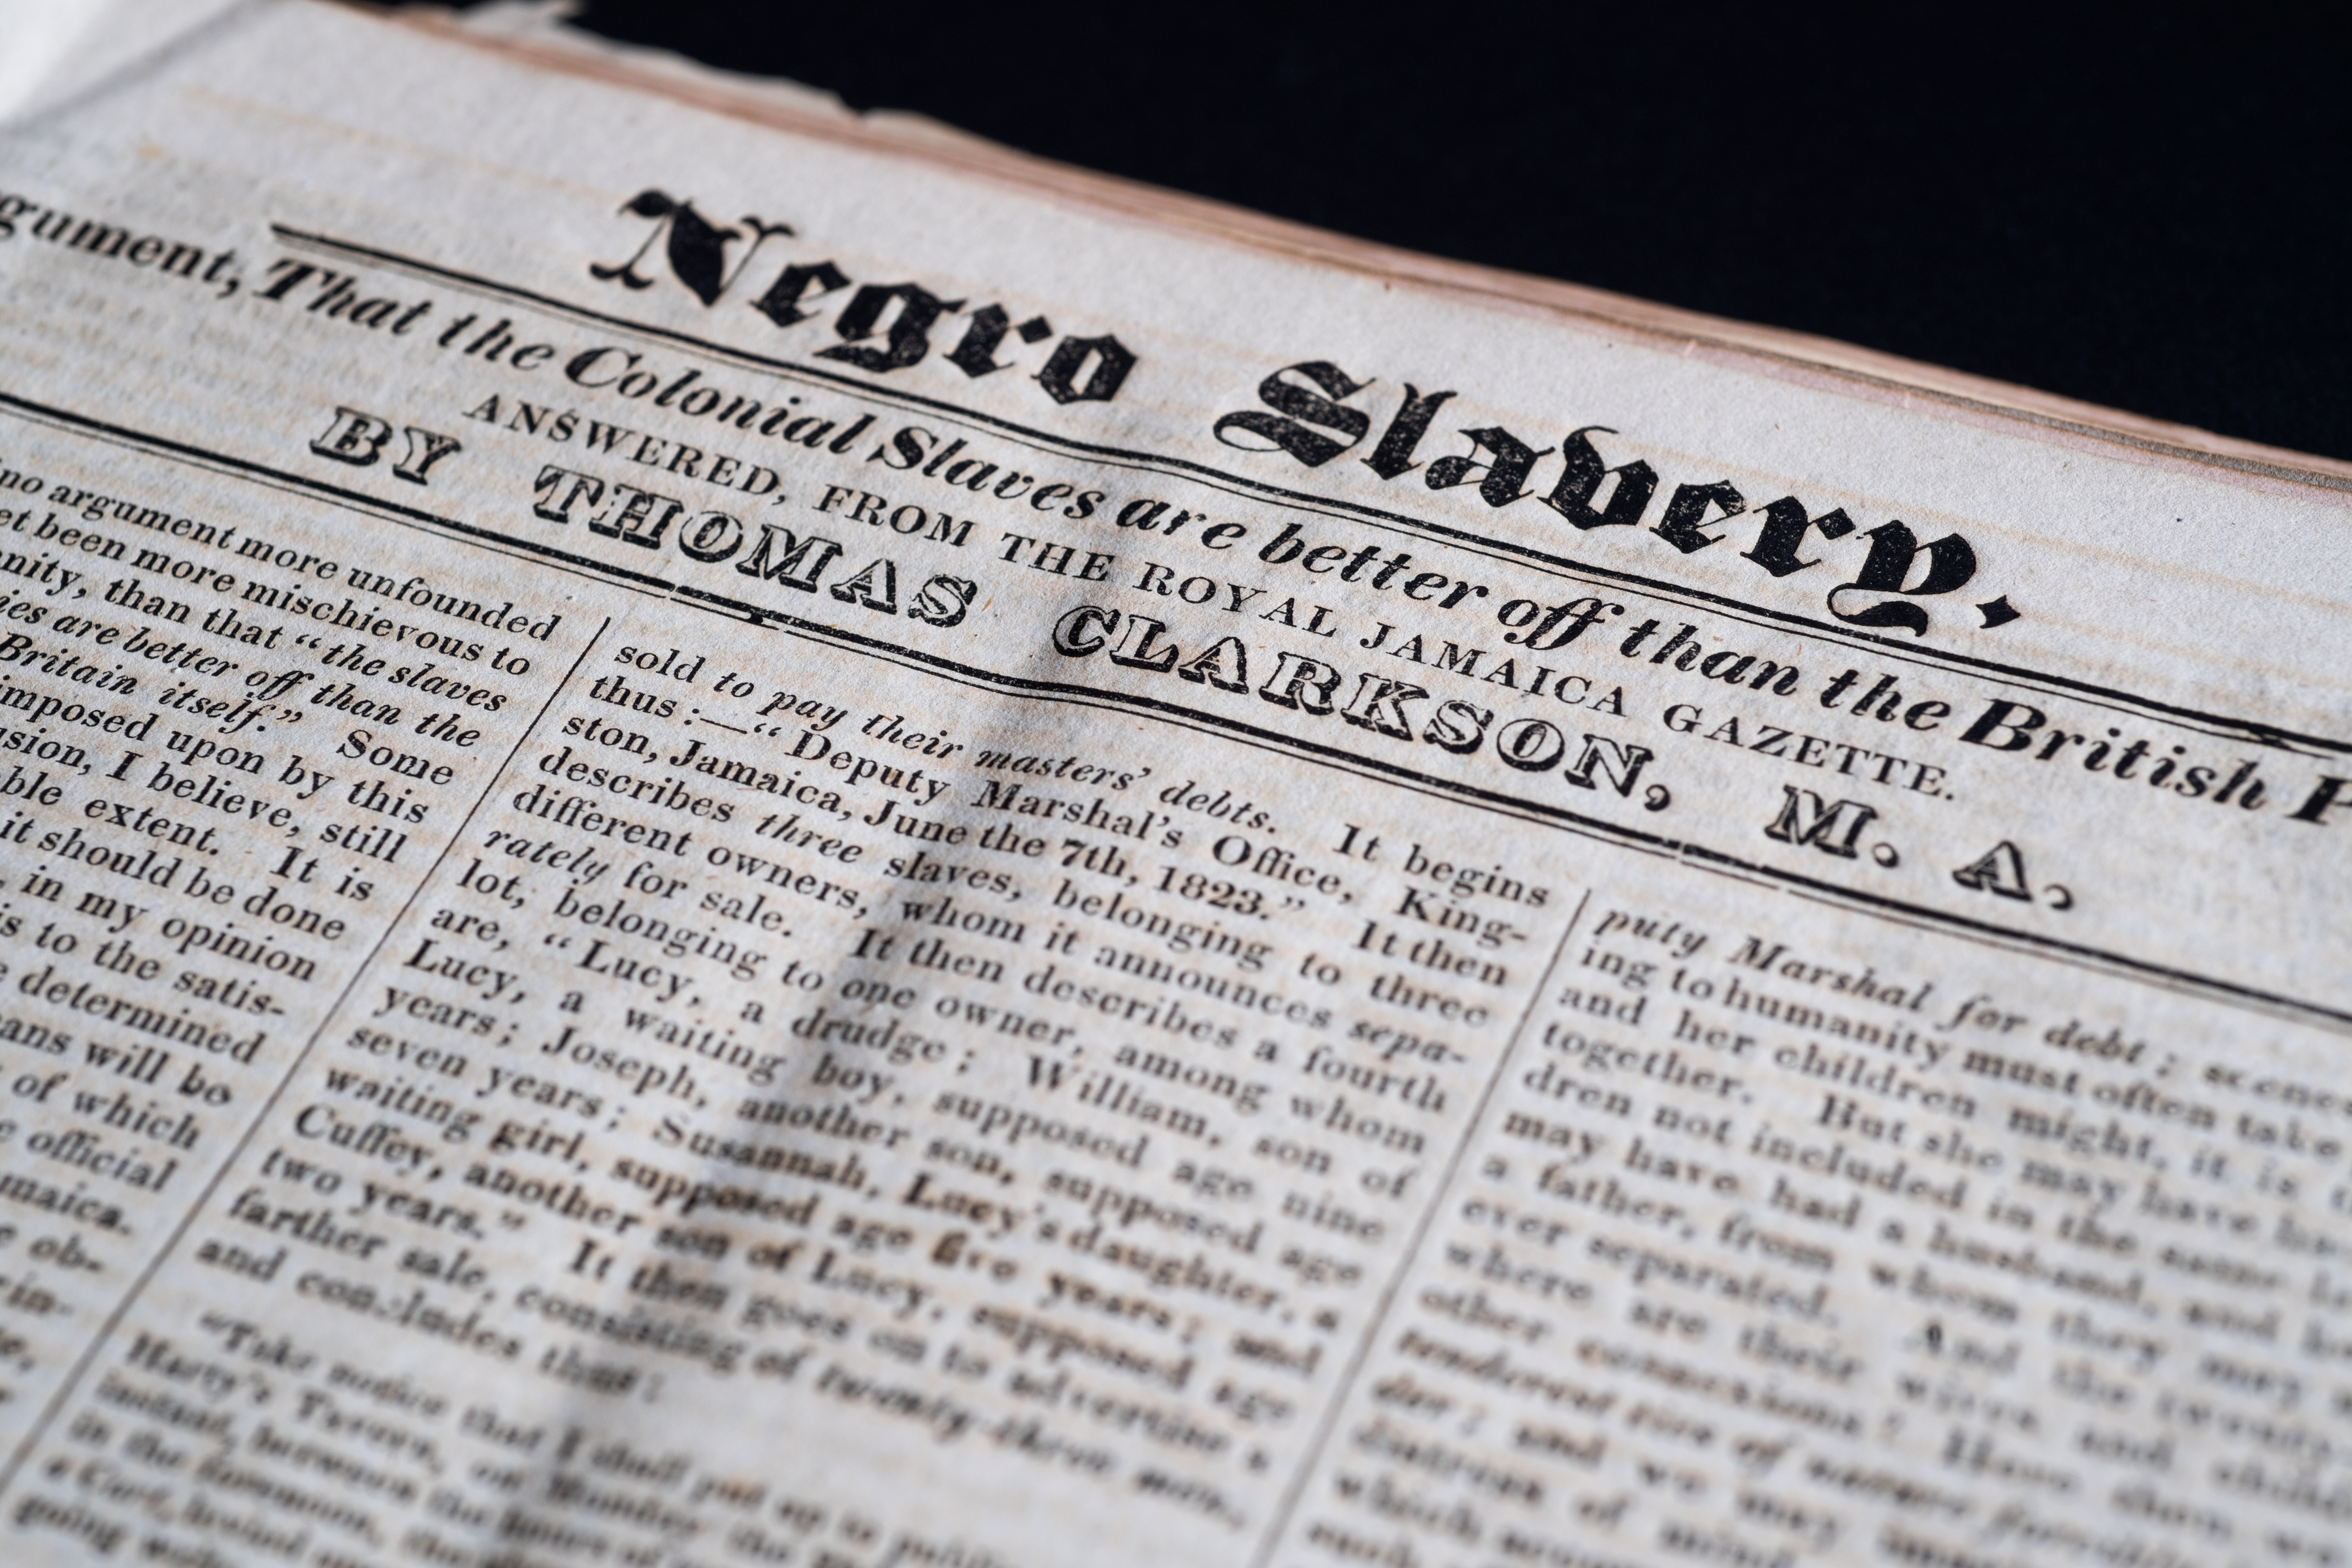 Detail of a printed newspaper shows headline "Negro Slavery" and other text in English.